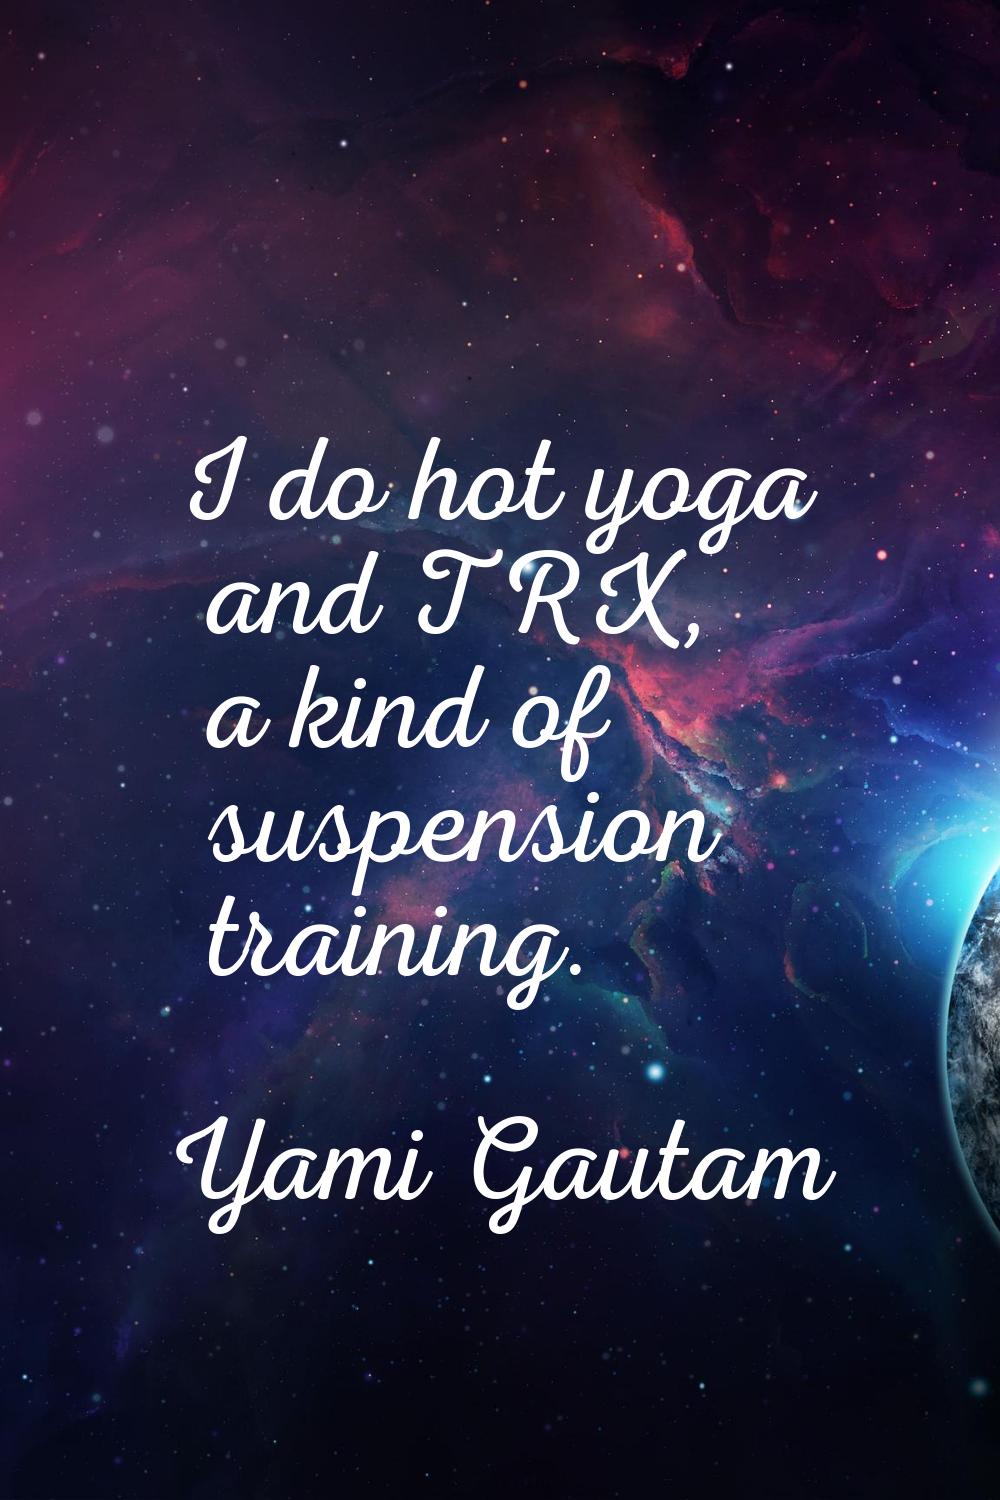 I do hot yoga and TRX, a kind of suspension training.